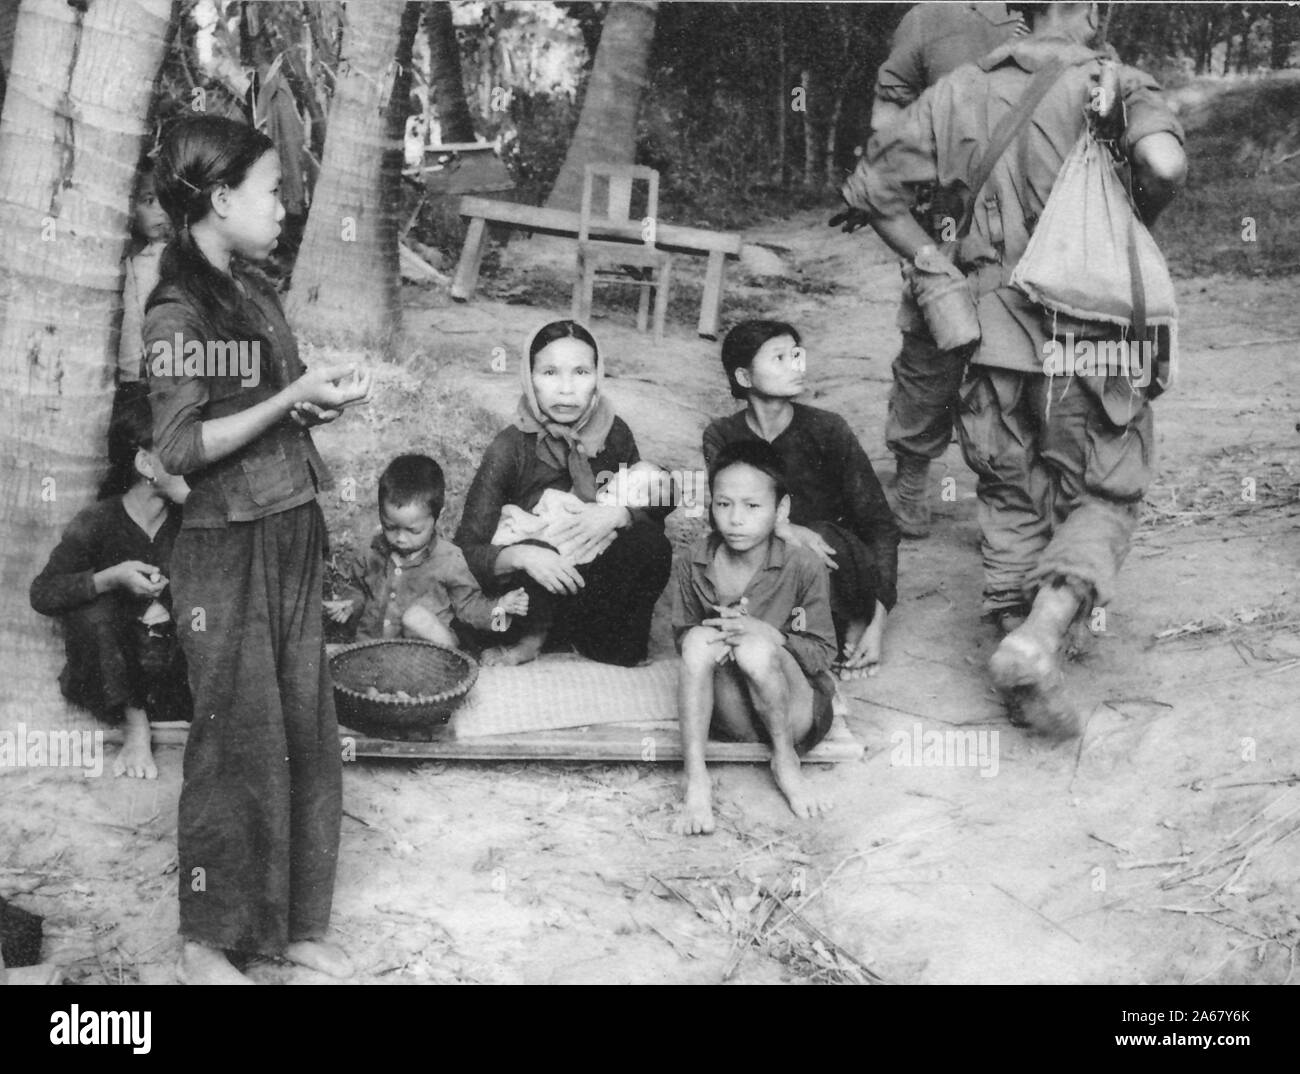 A small group of Vietnamese women and children sit outside on a wooden plinth in a shady area, some face the camera while others watch uniformed soldiers walk past at right, Vietnam, 1965. () Stock Photo